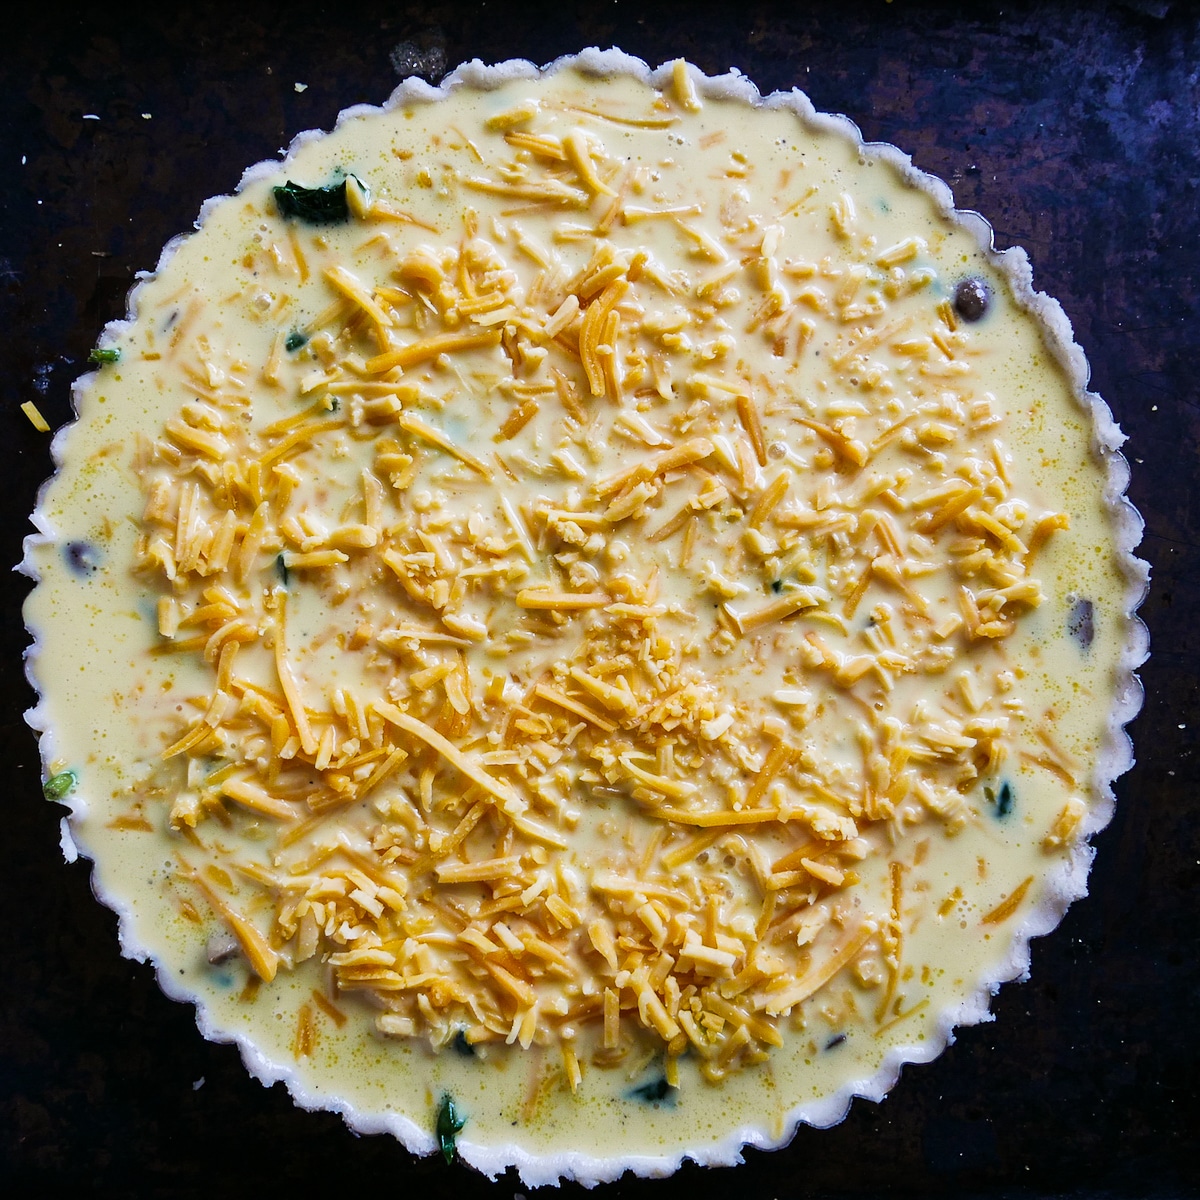 Egg mixture poured on top of vegetables in a tart pan and topped with cheese.